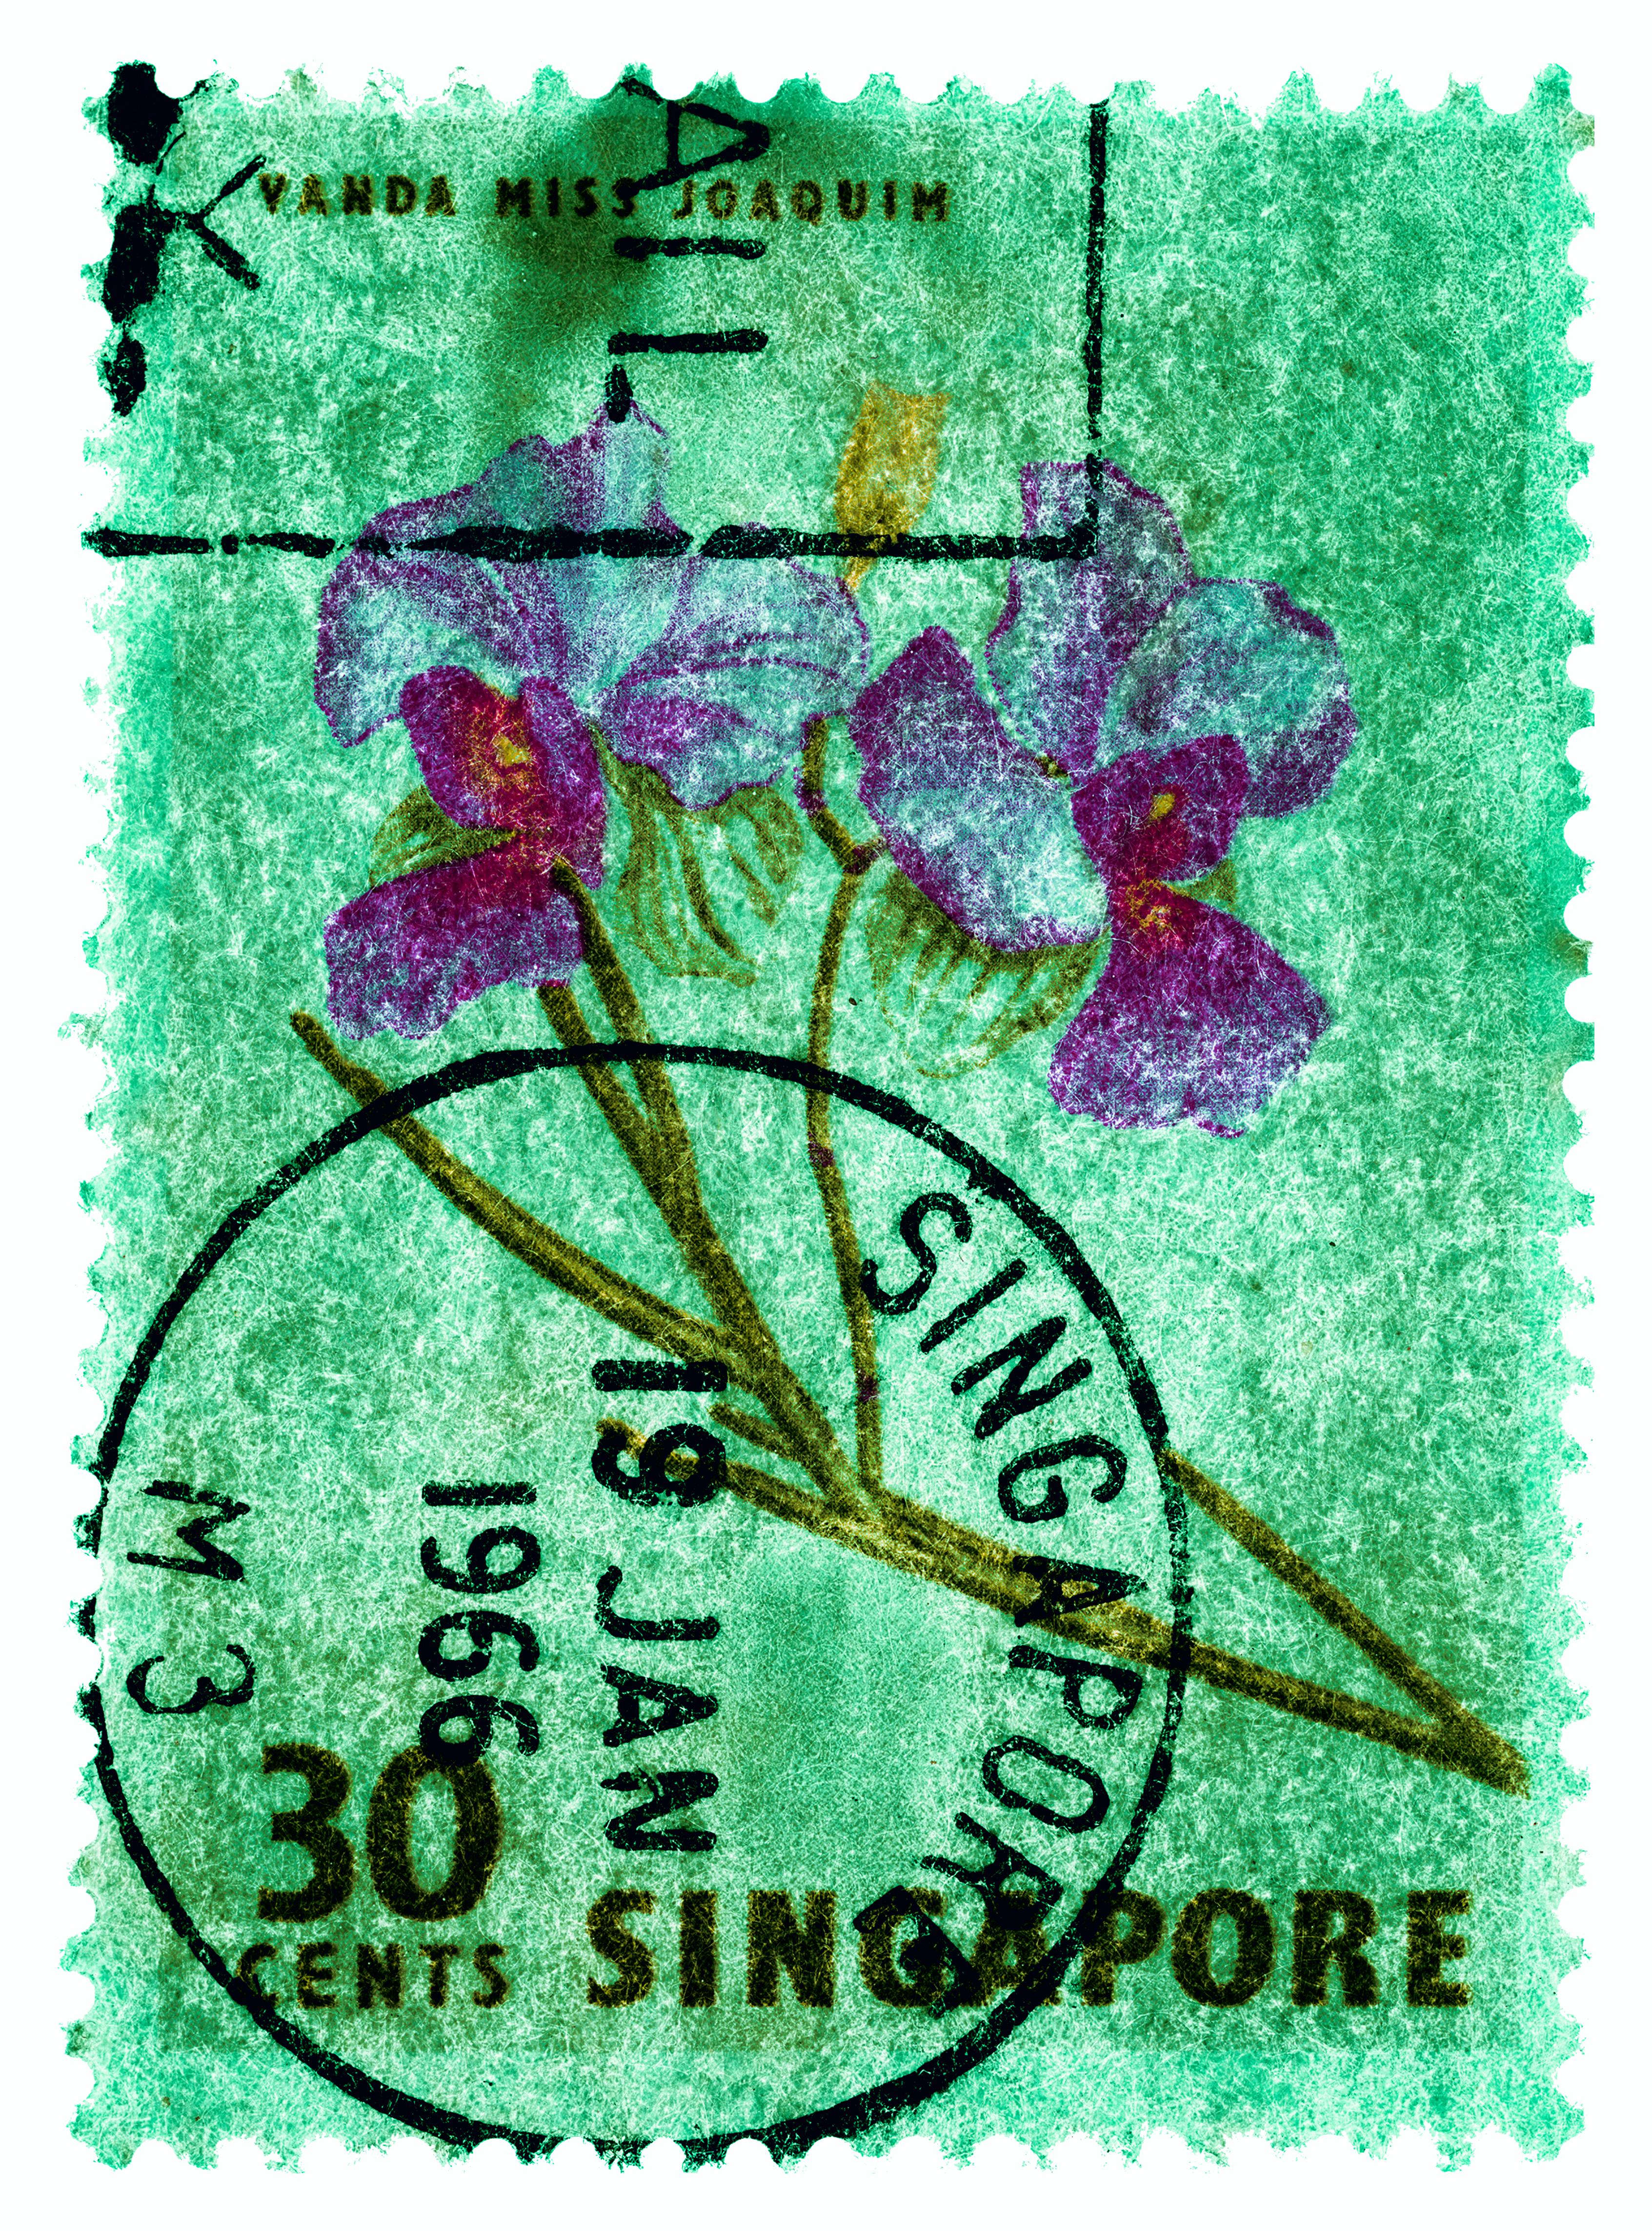 Singapore Stamp Collection, 30c Singapore Three - Floral color photo For Sale 1